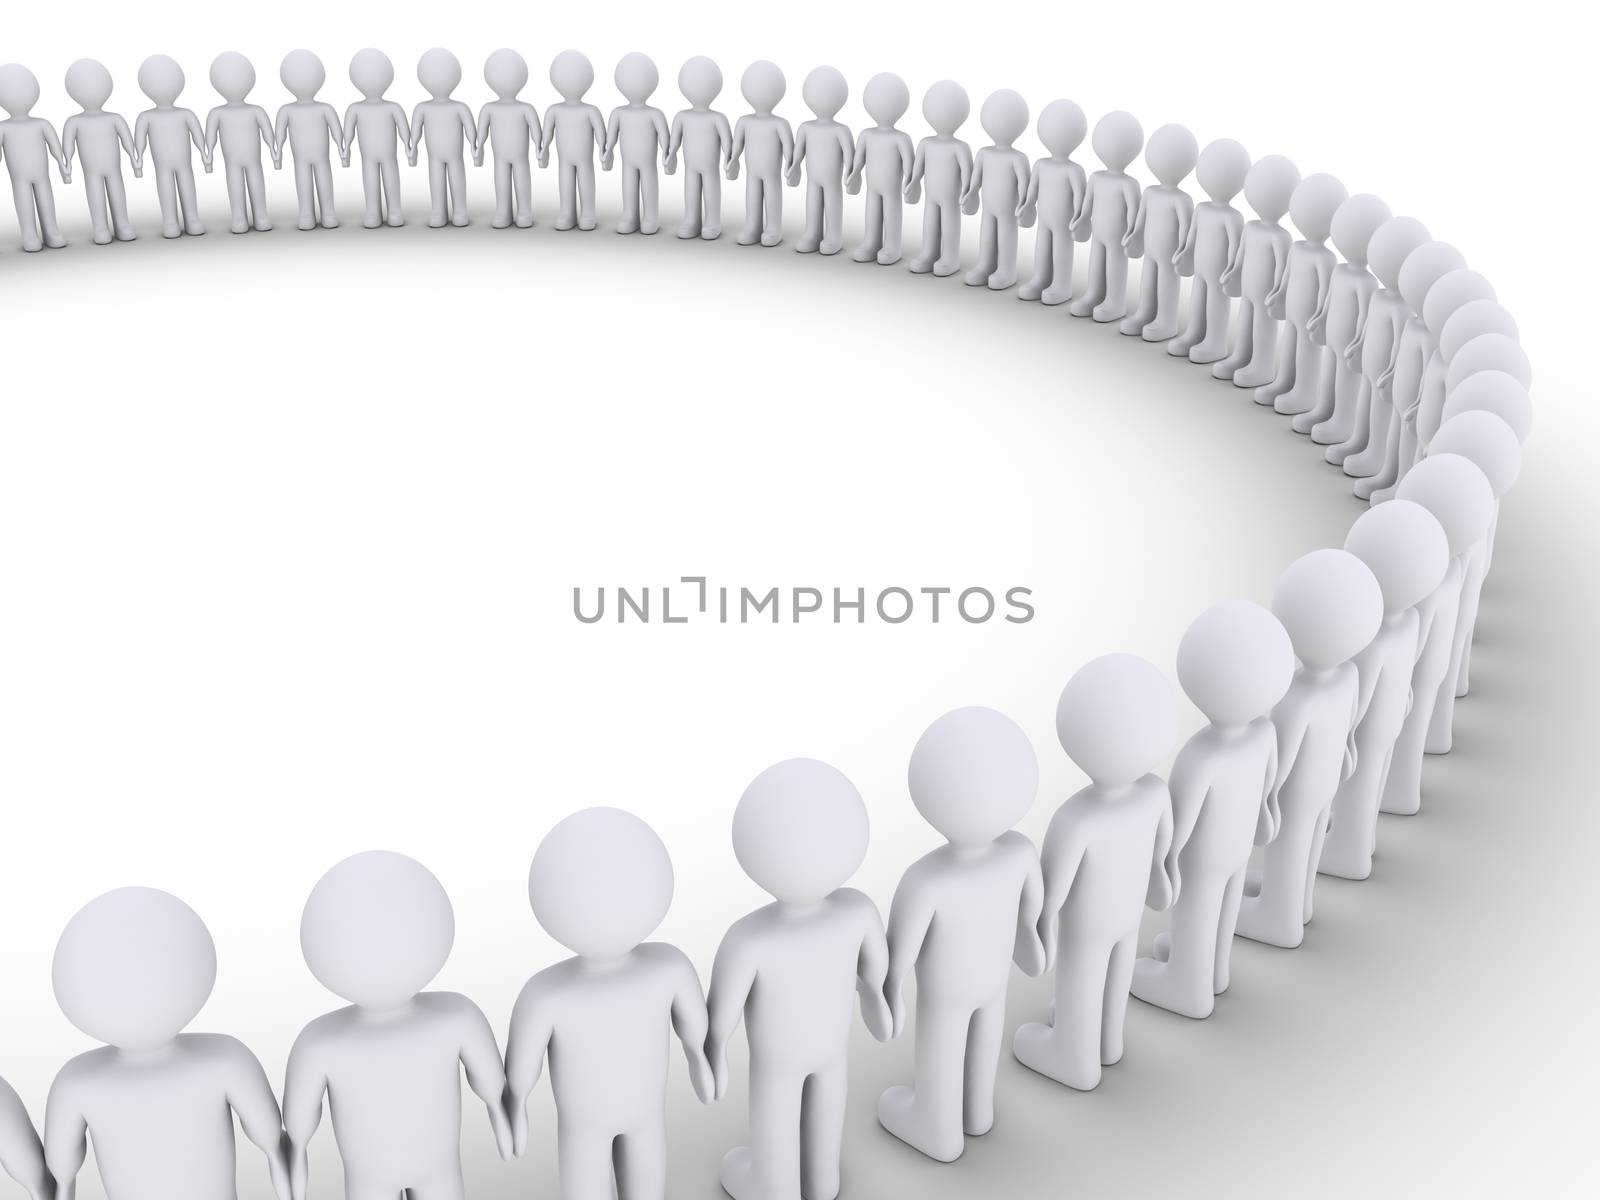 3d people standing next to each other form a big circle